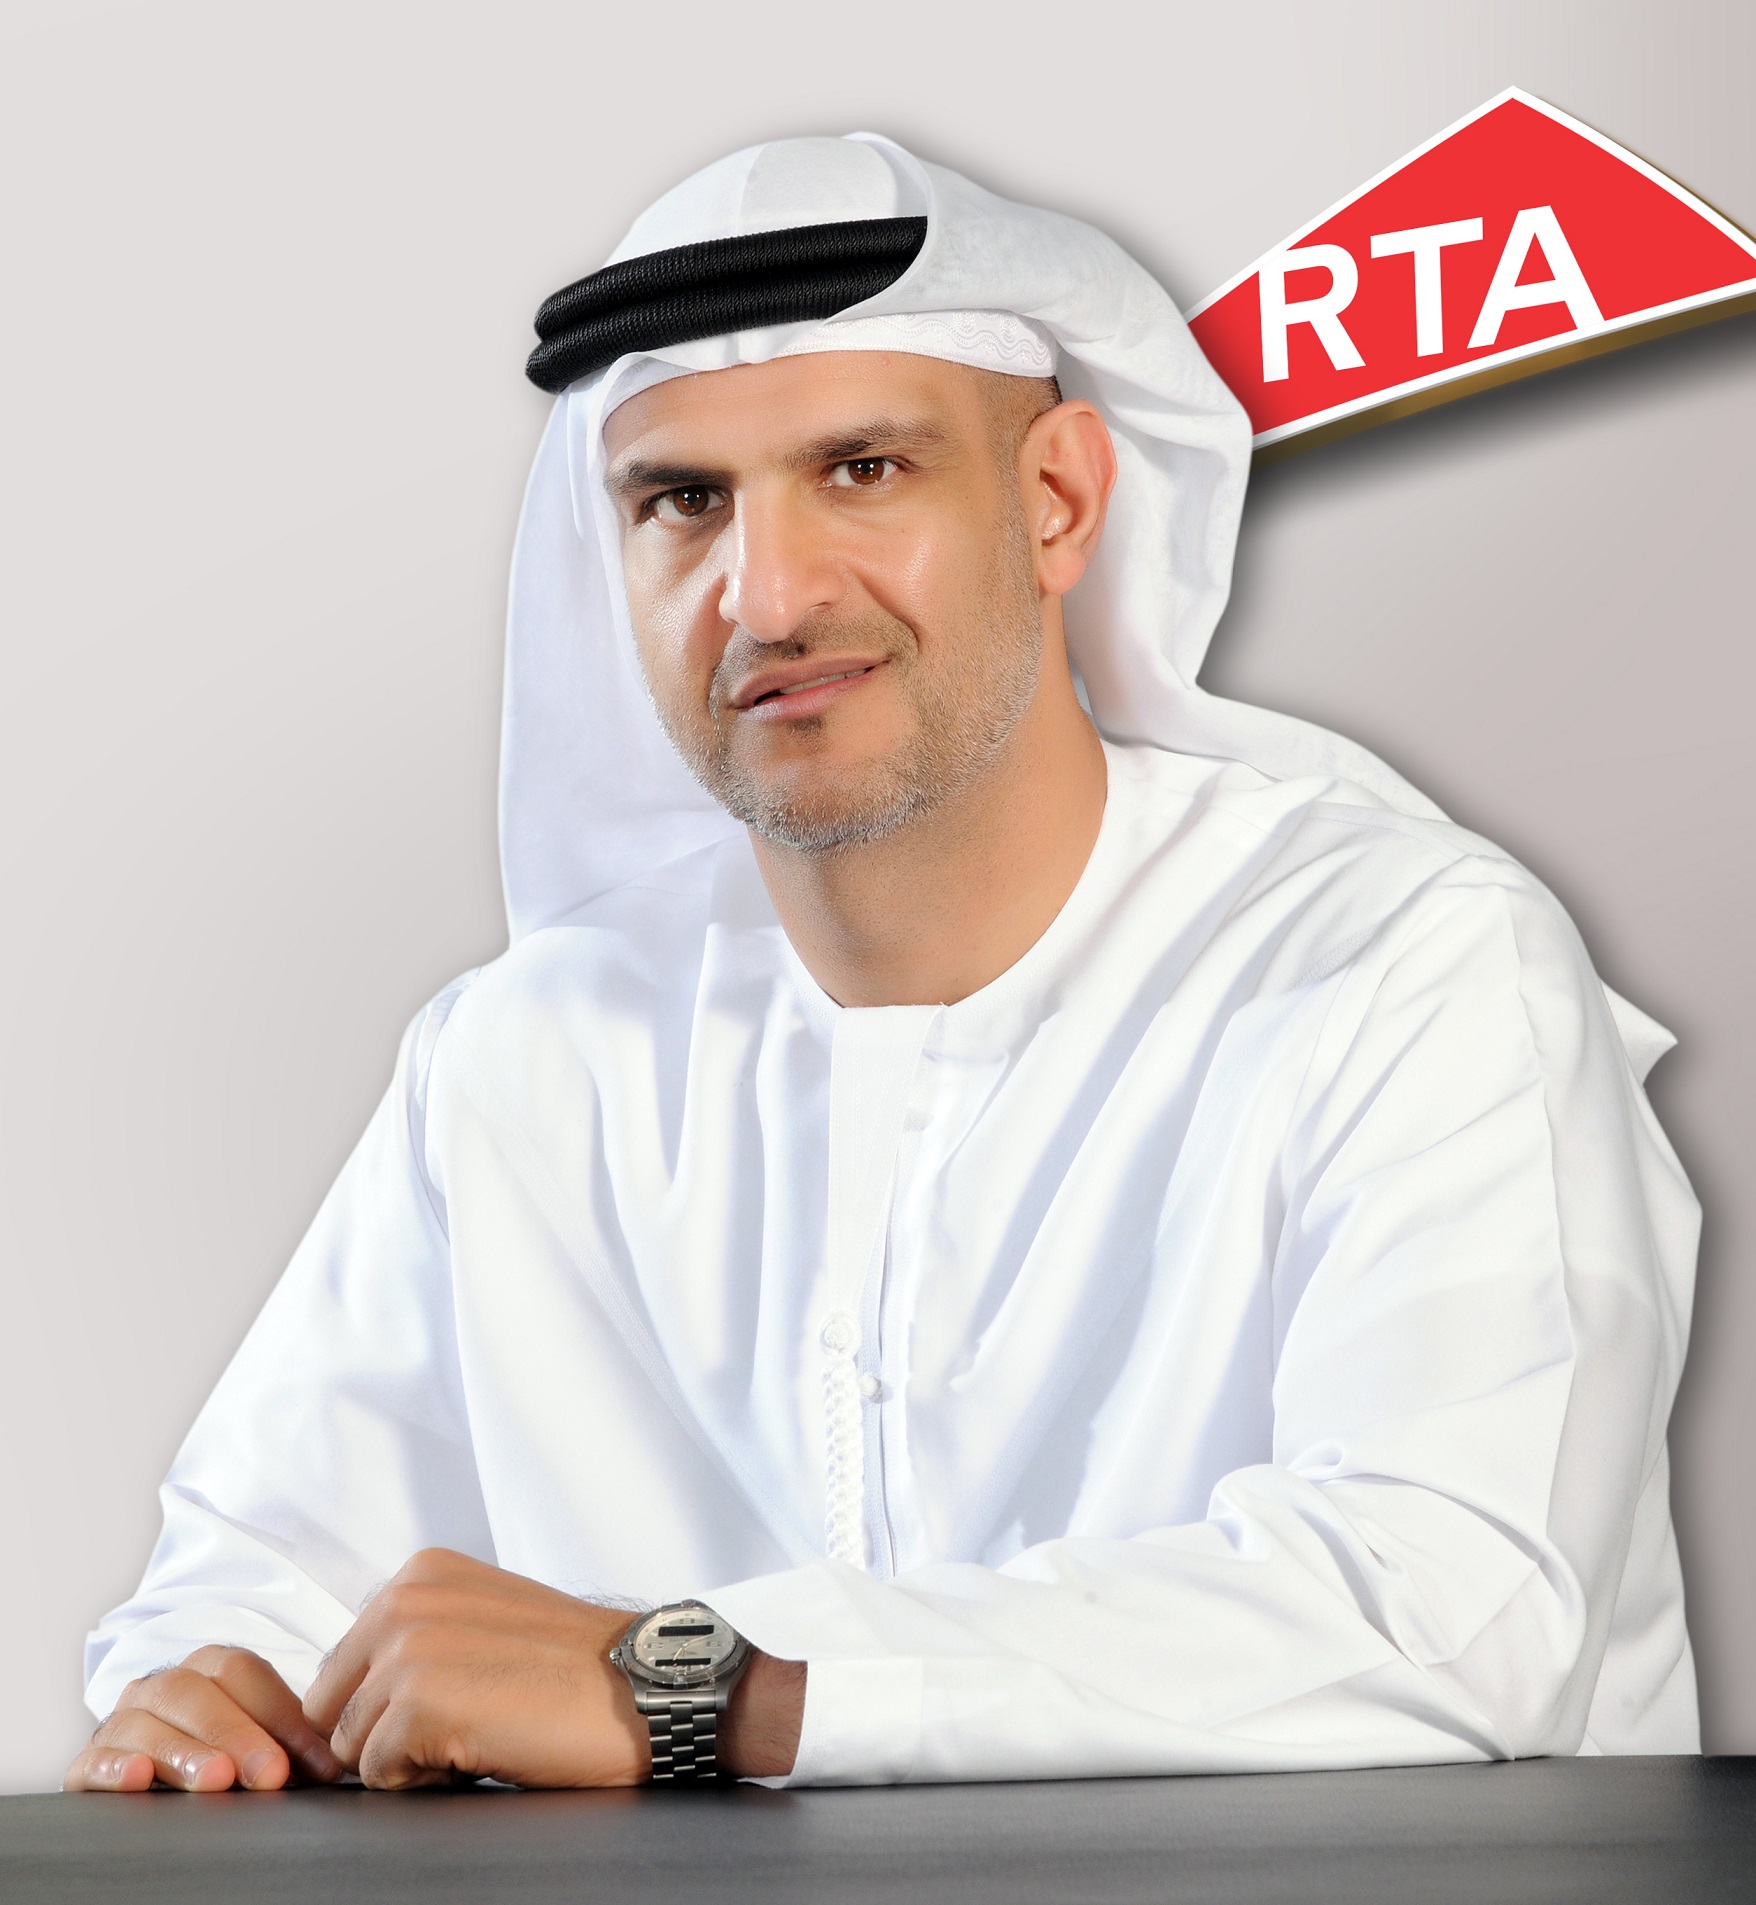 rta_adopts_hi-tech_solutions_to_monitor_faults_of_heavy_vehicles